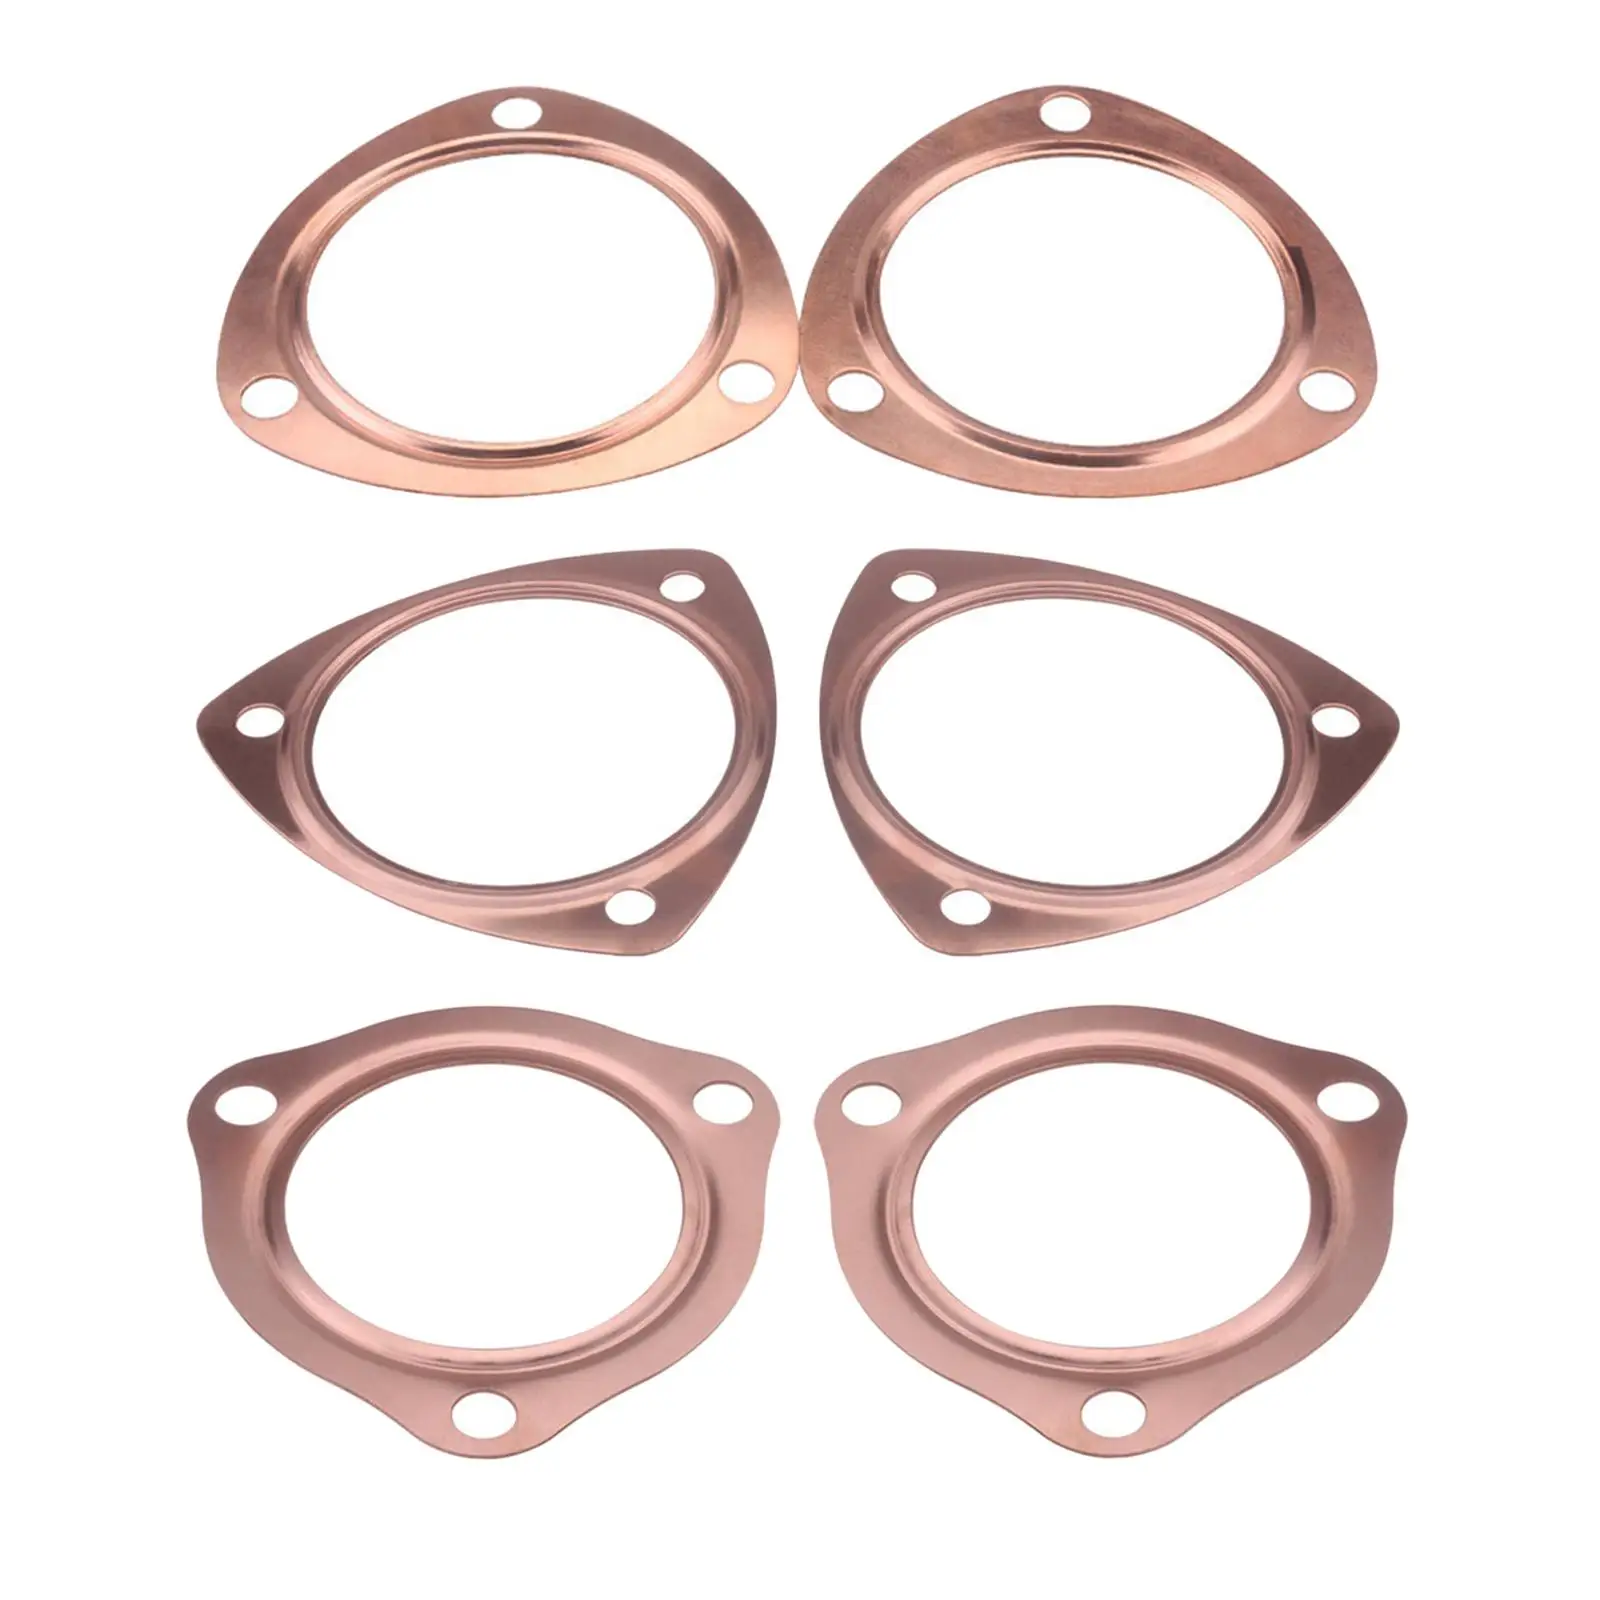 Copper Collector Gasket Reusable Wear Resisting for Sbc Bbc 302 350 454 Replacement